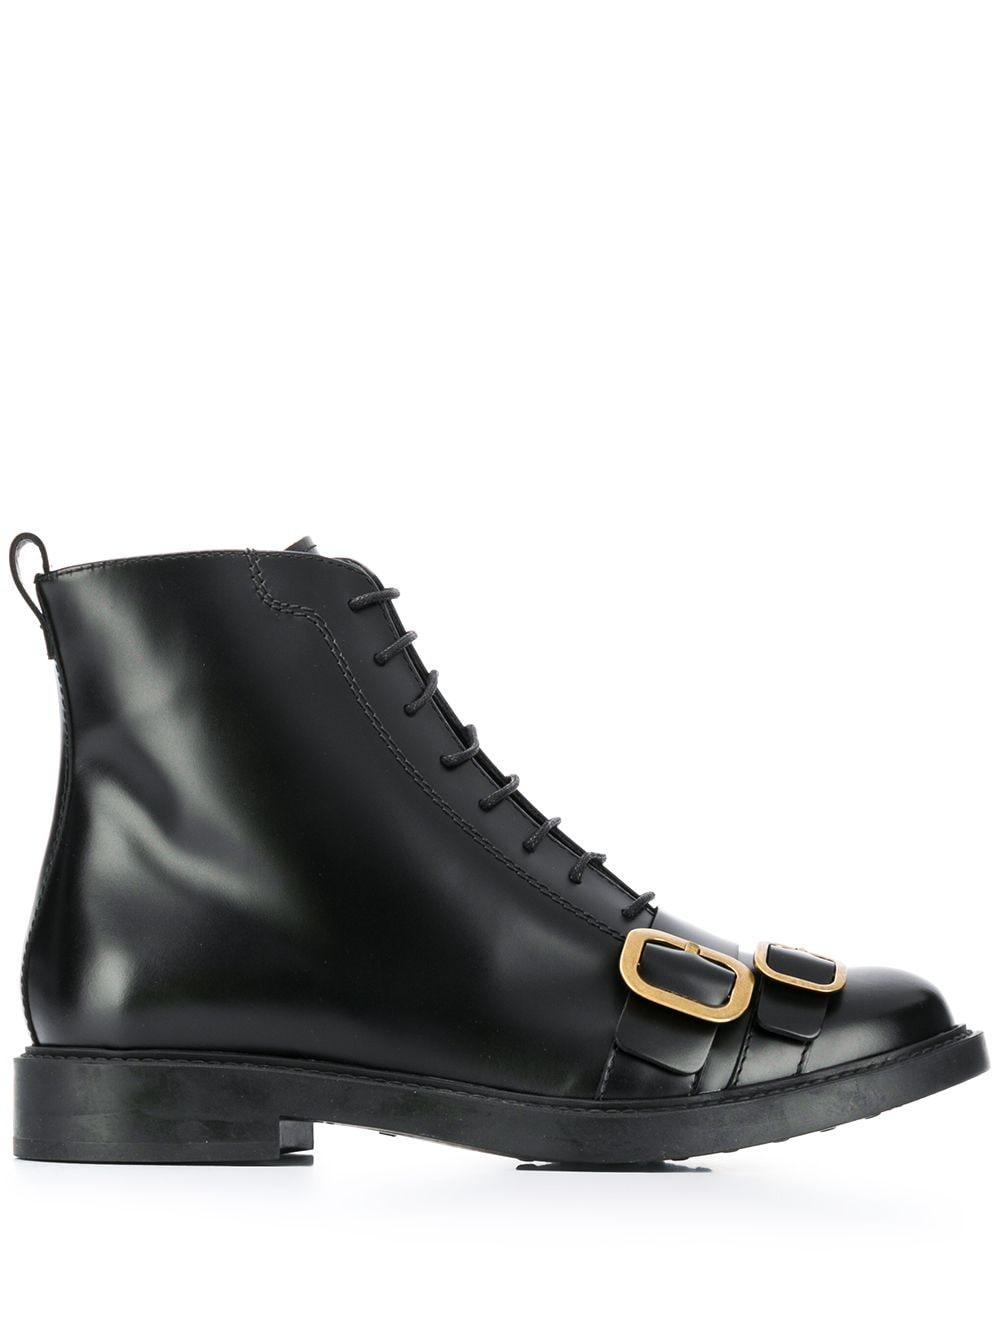 Tod's Lace Up Ankle Boots With Buckle Detailing in Black | Lyst